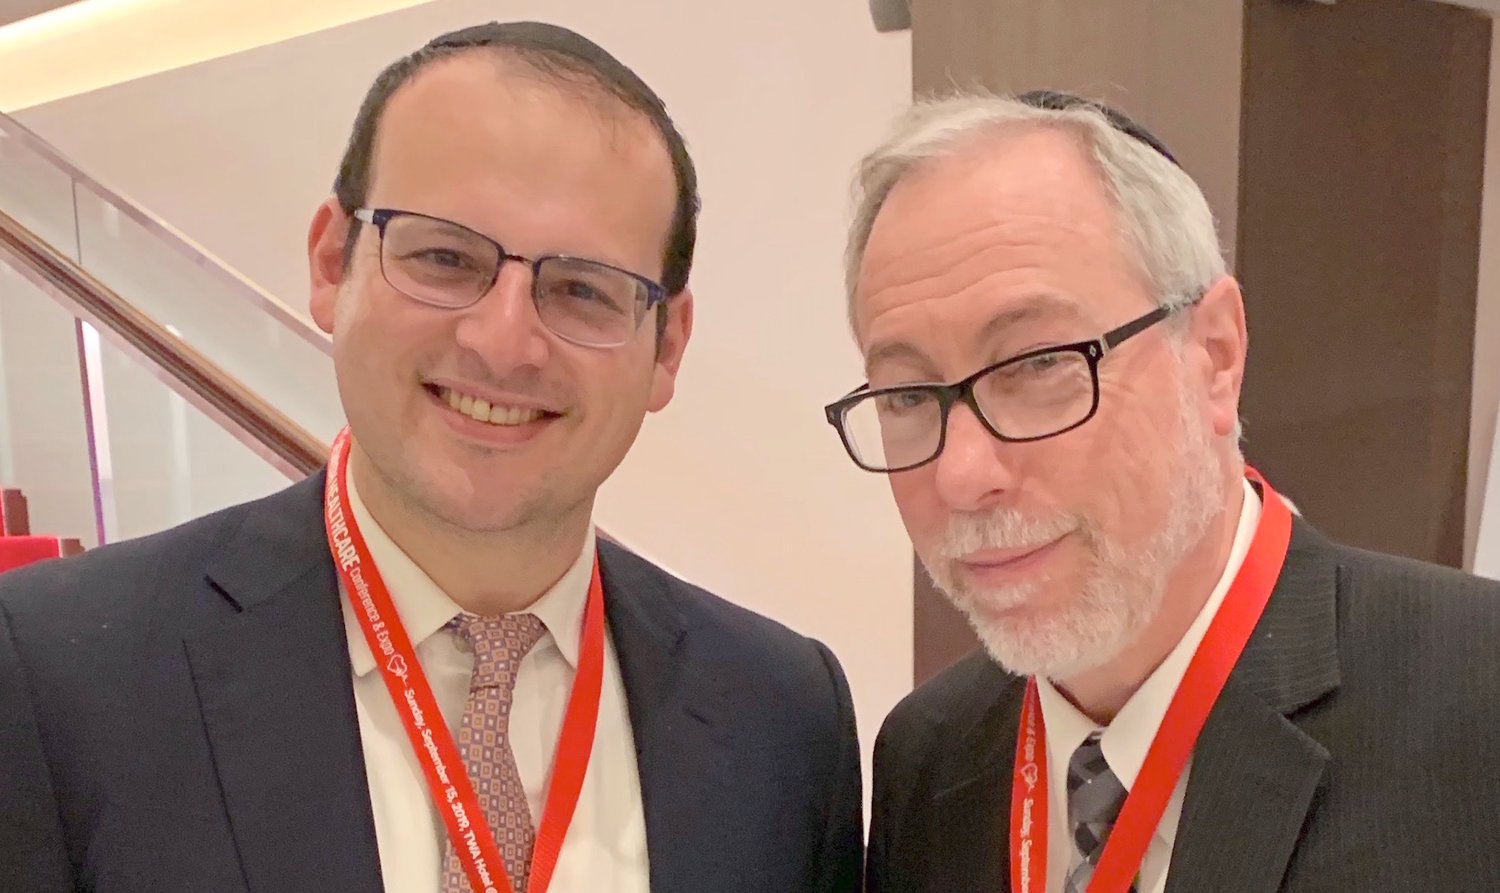 Rabbi Ashe Schreier (left) of the Young Israel of Forest Hills, and Rabbi Aaron E. Glatt, MD, assistant rabbi at the Young Israel of Woodmere and medical chair at Mount Sinai South Nassau.